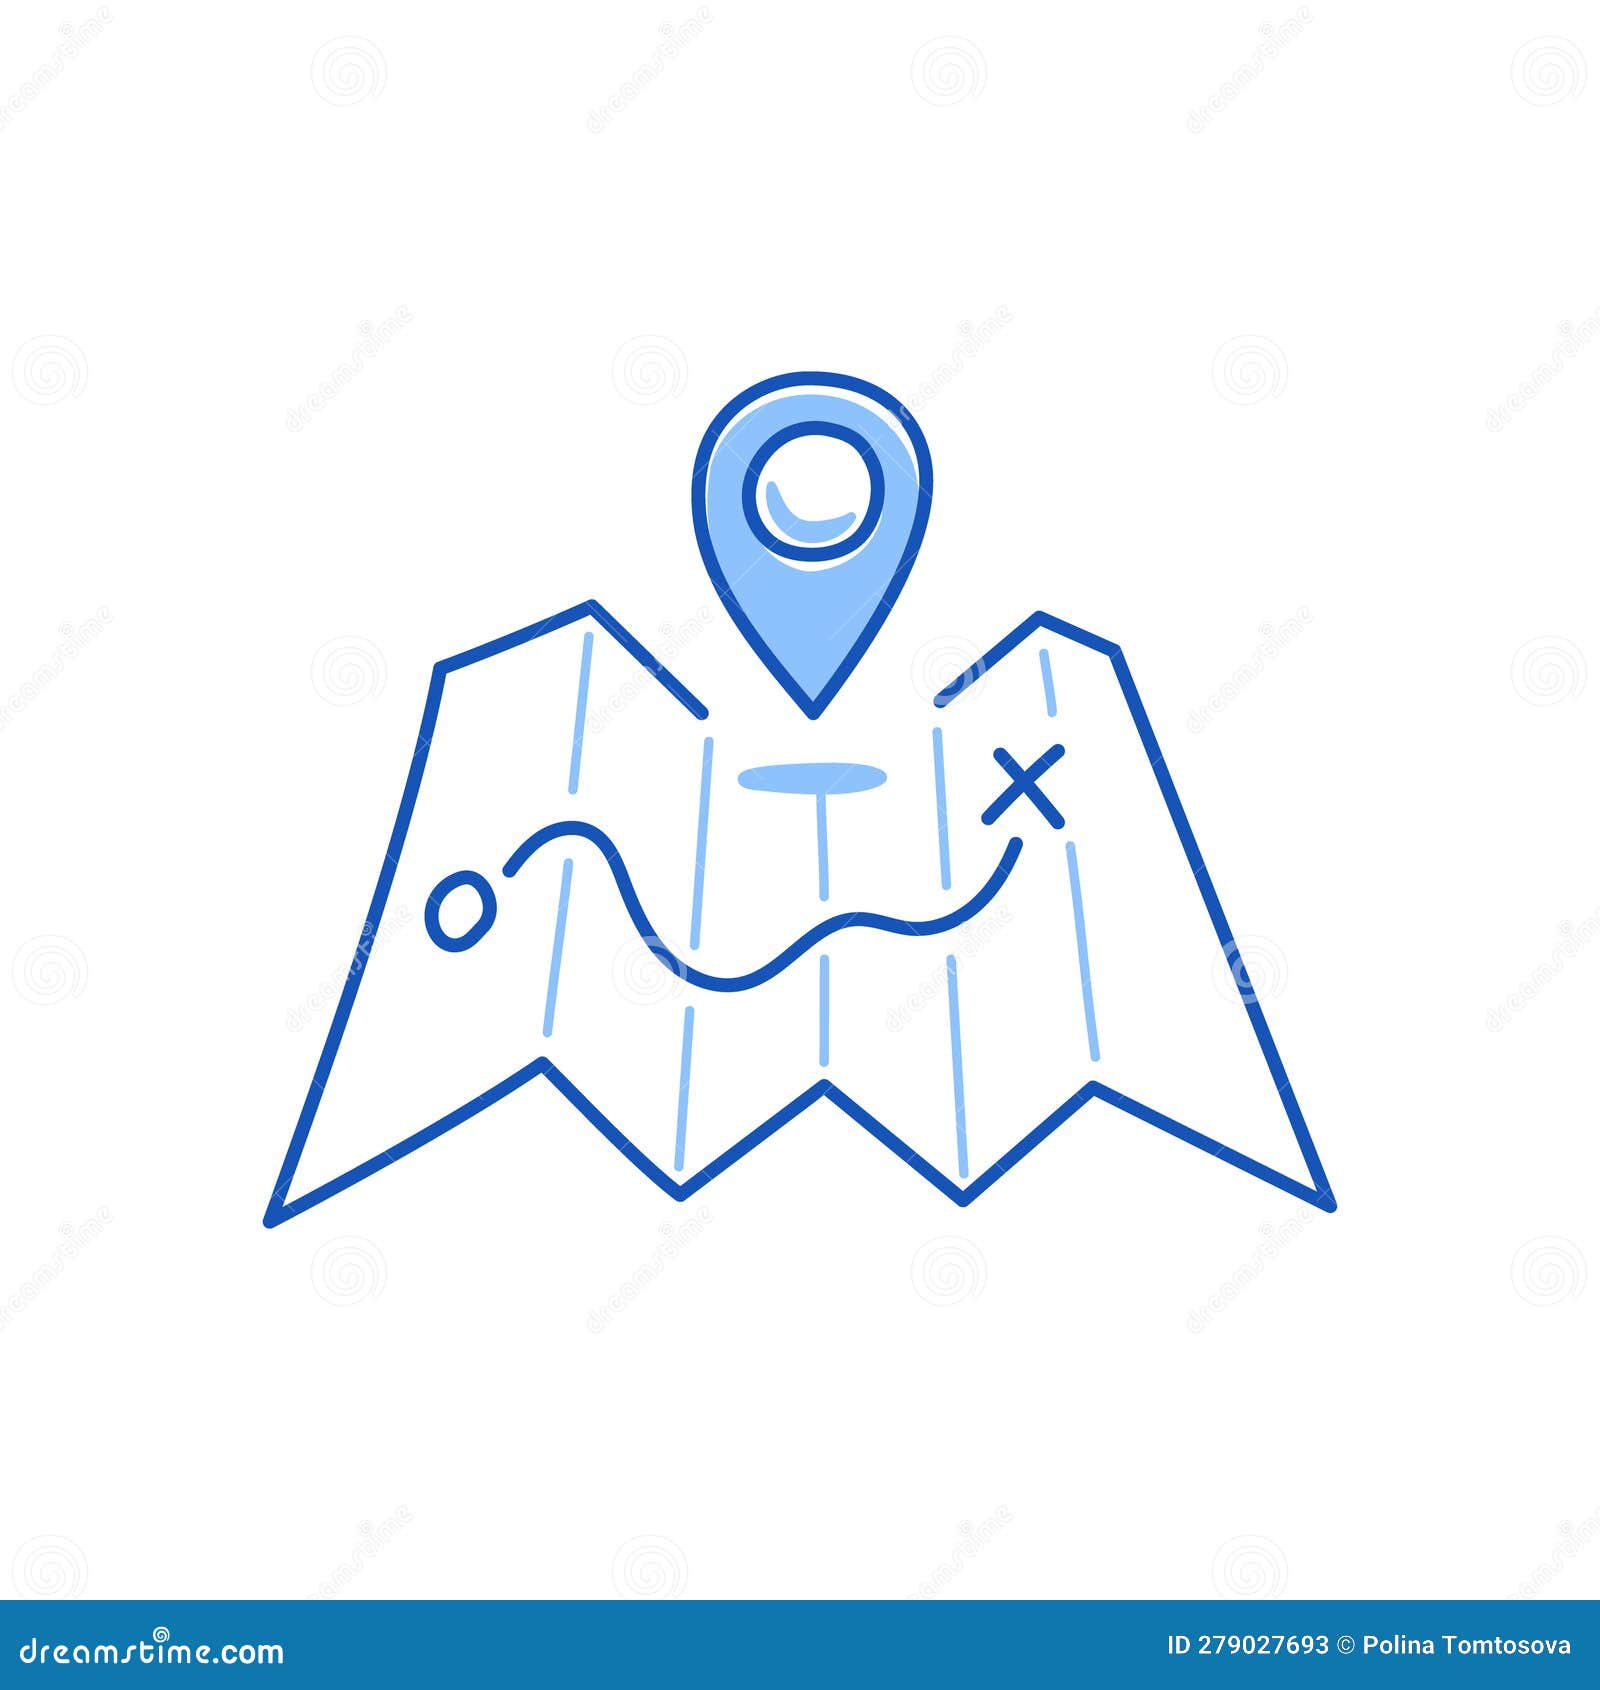 Free Location Map Maker with Free Templates - EdrawMax